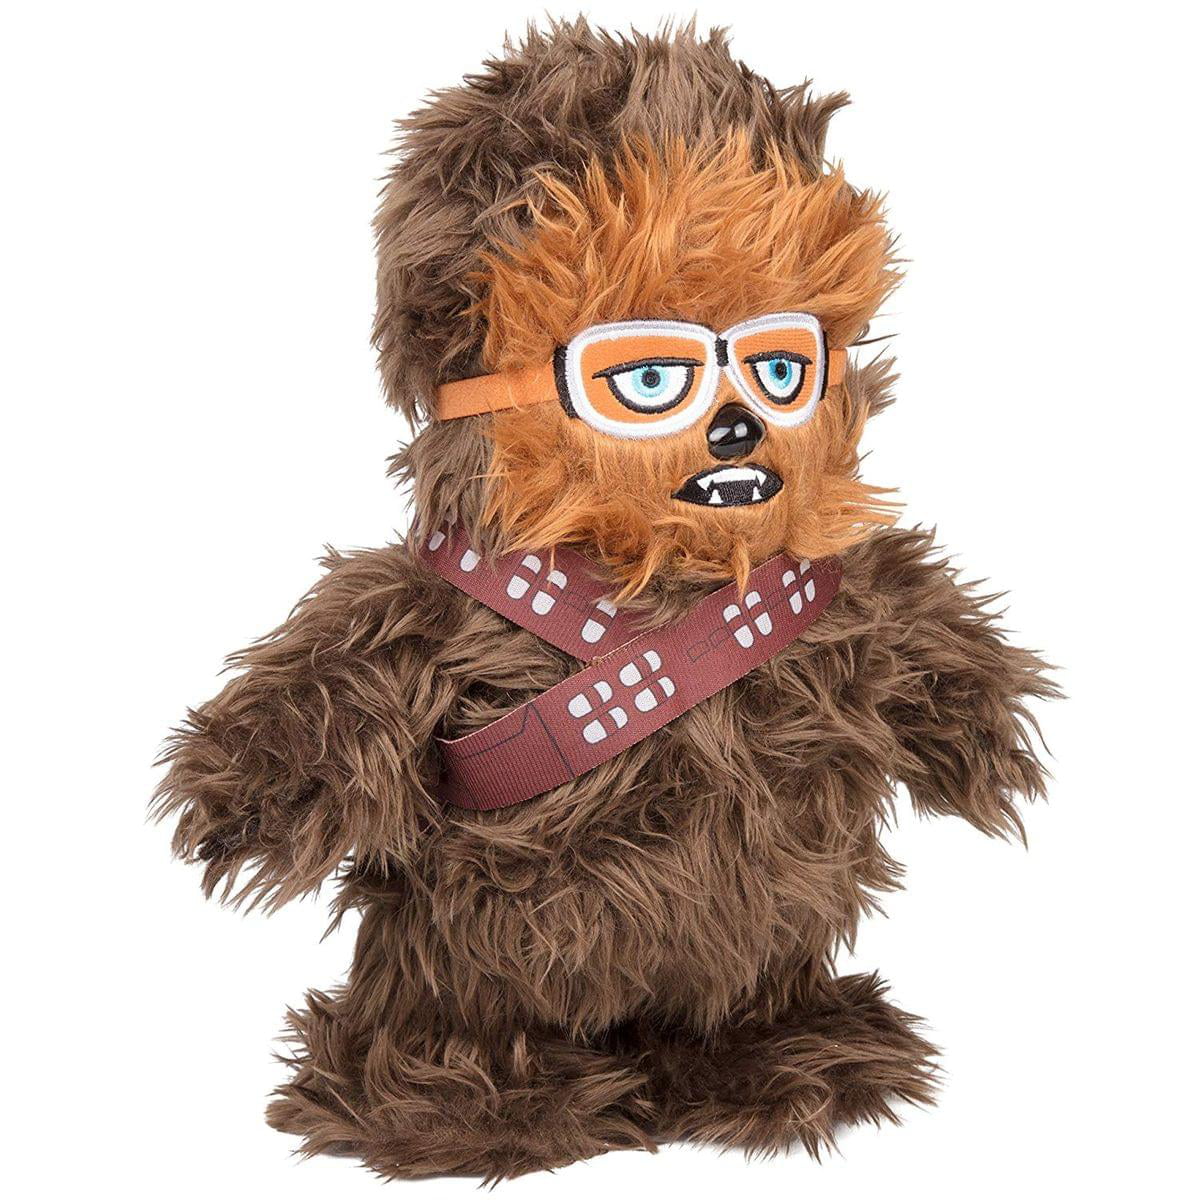 SCS Direct Star Wars Solo Movie Chewbacca Interactive Walk N Roar 12 Plush Makes Wookiee Talking Sounds and Walks Seven20